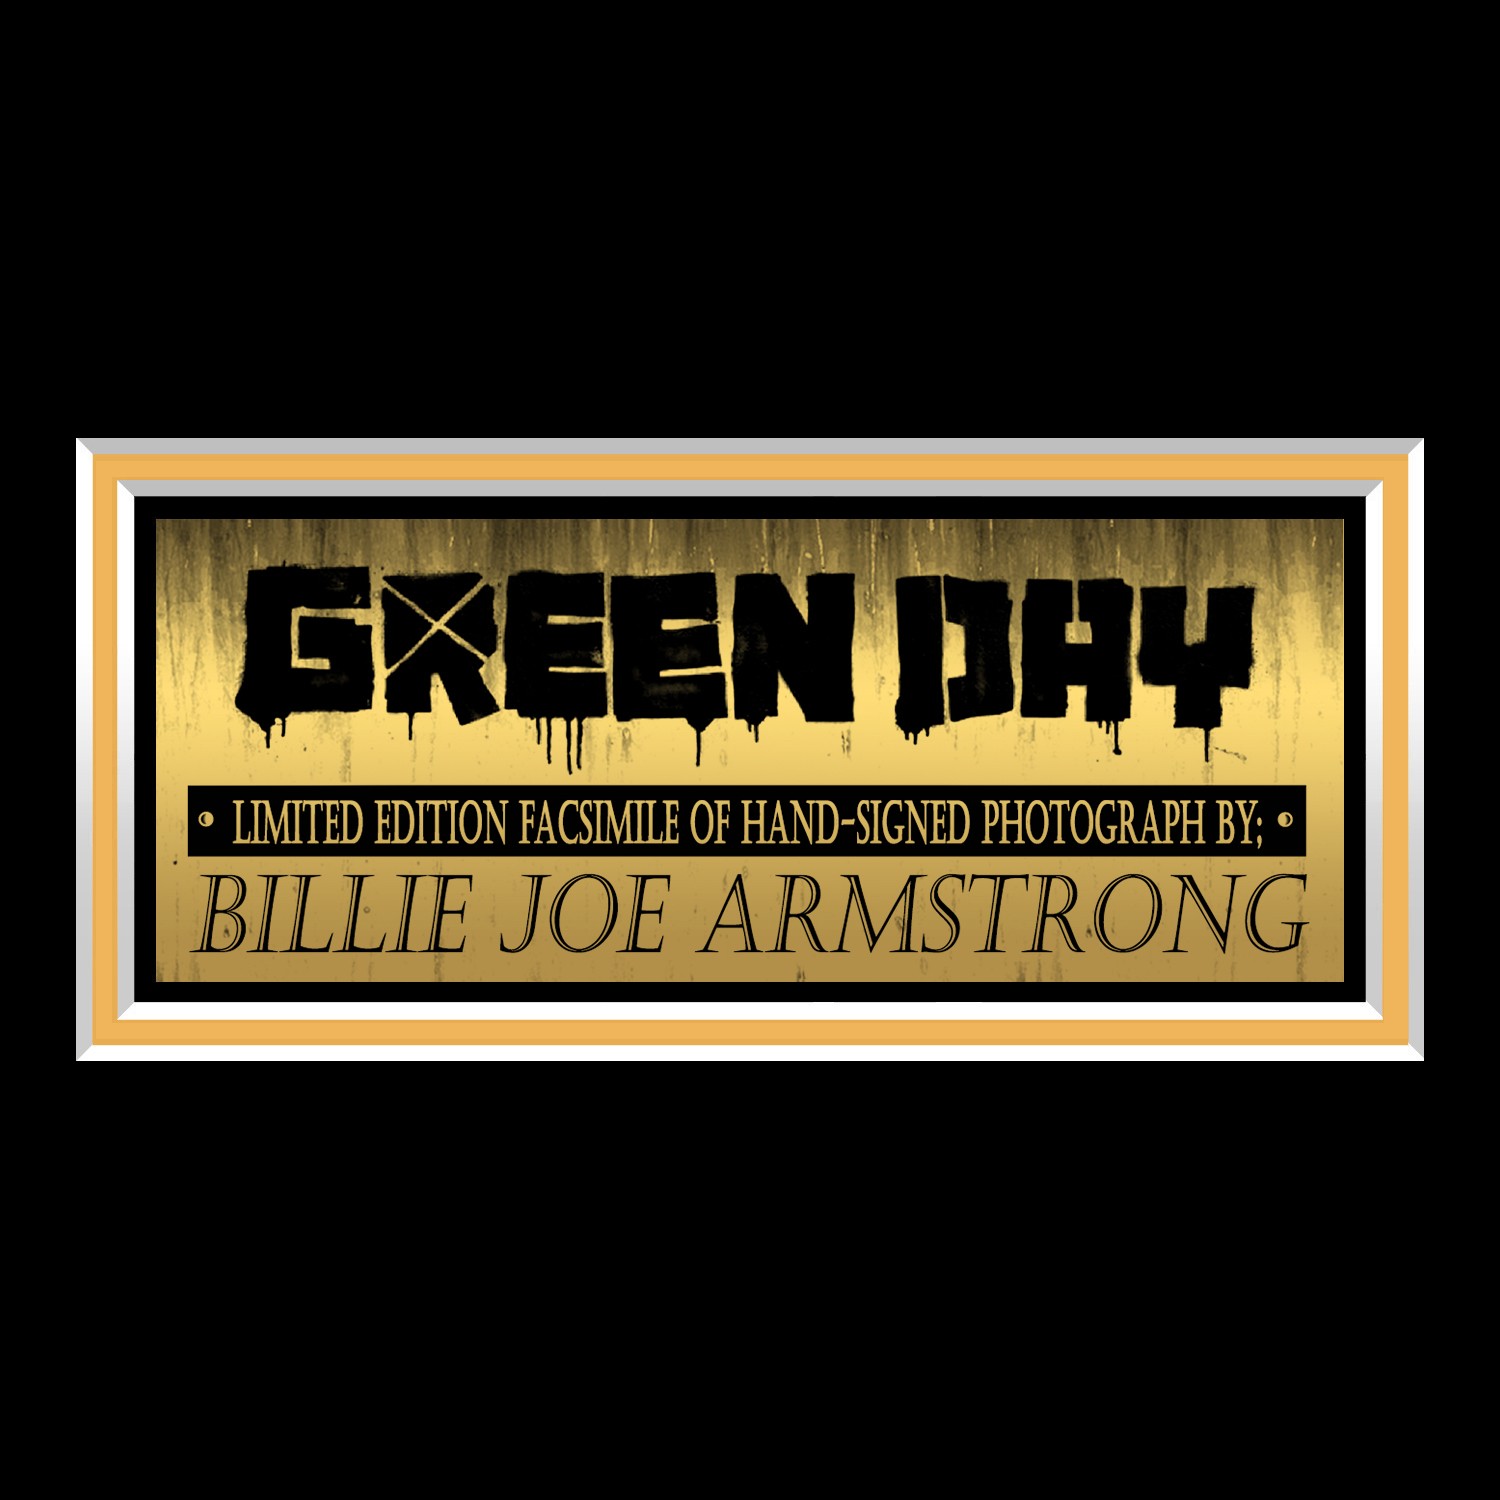 Billie Joe Armstrong Signed Green Day Vinyl Record Album with